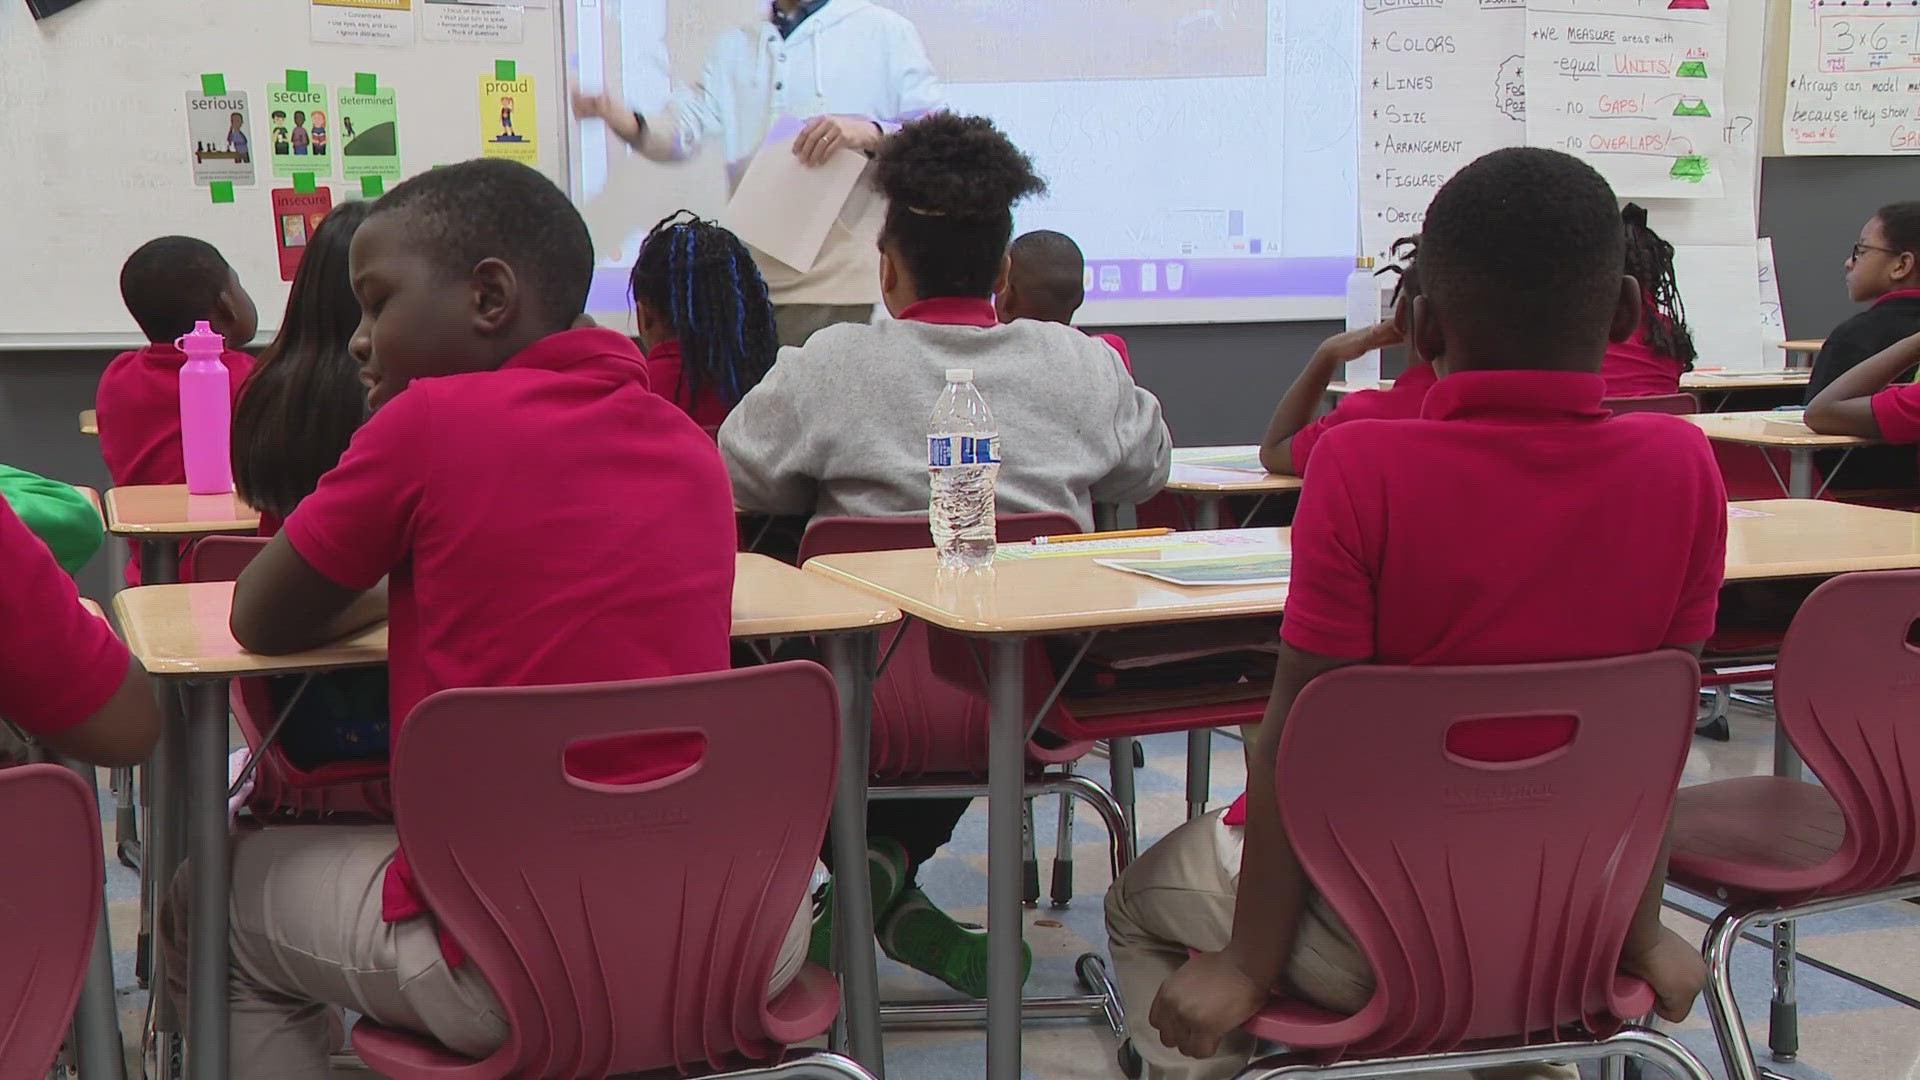 Statewide, almost one in five third graders are still struggling to read. That's according to the results of this year's IREAD tests for Indiana's students.